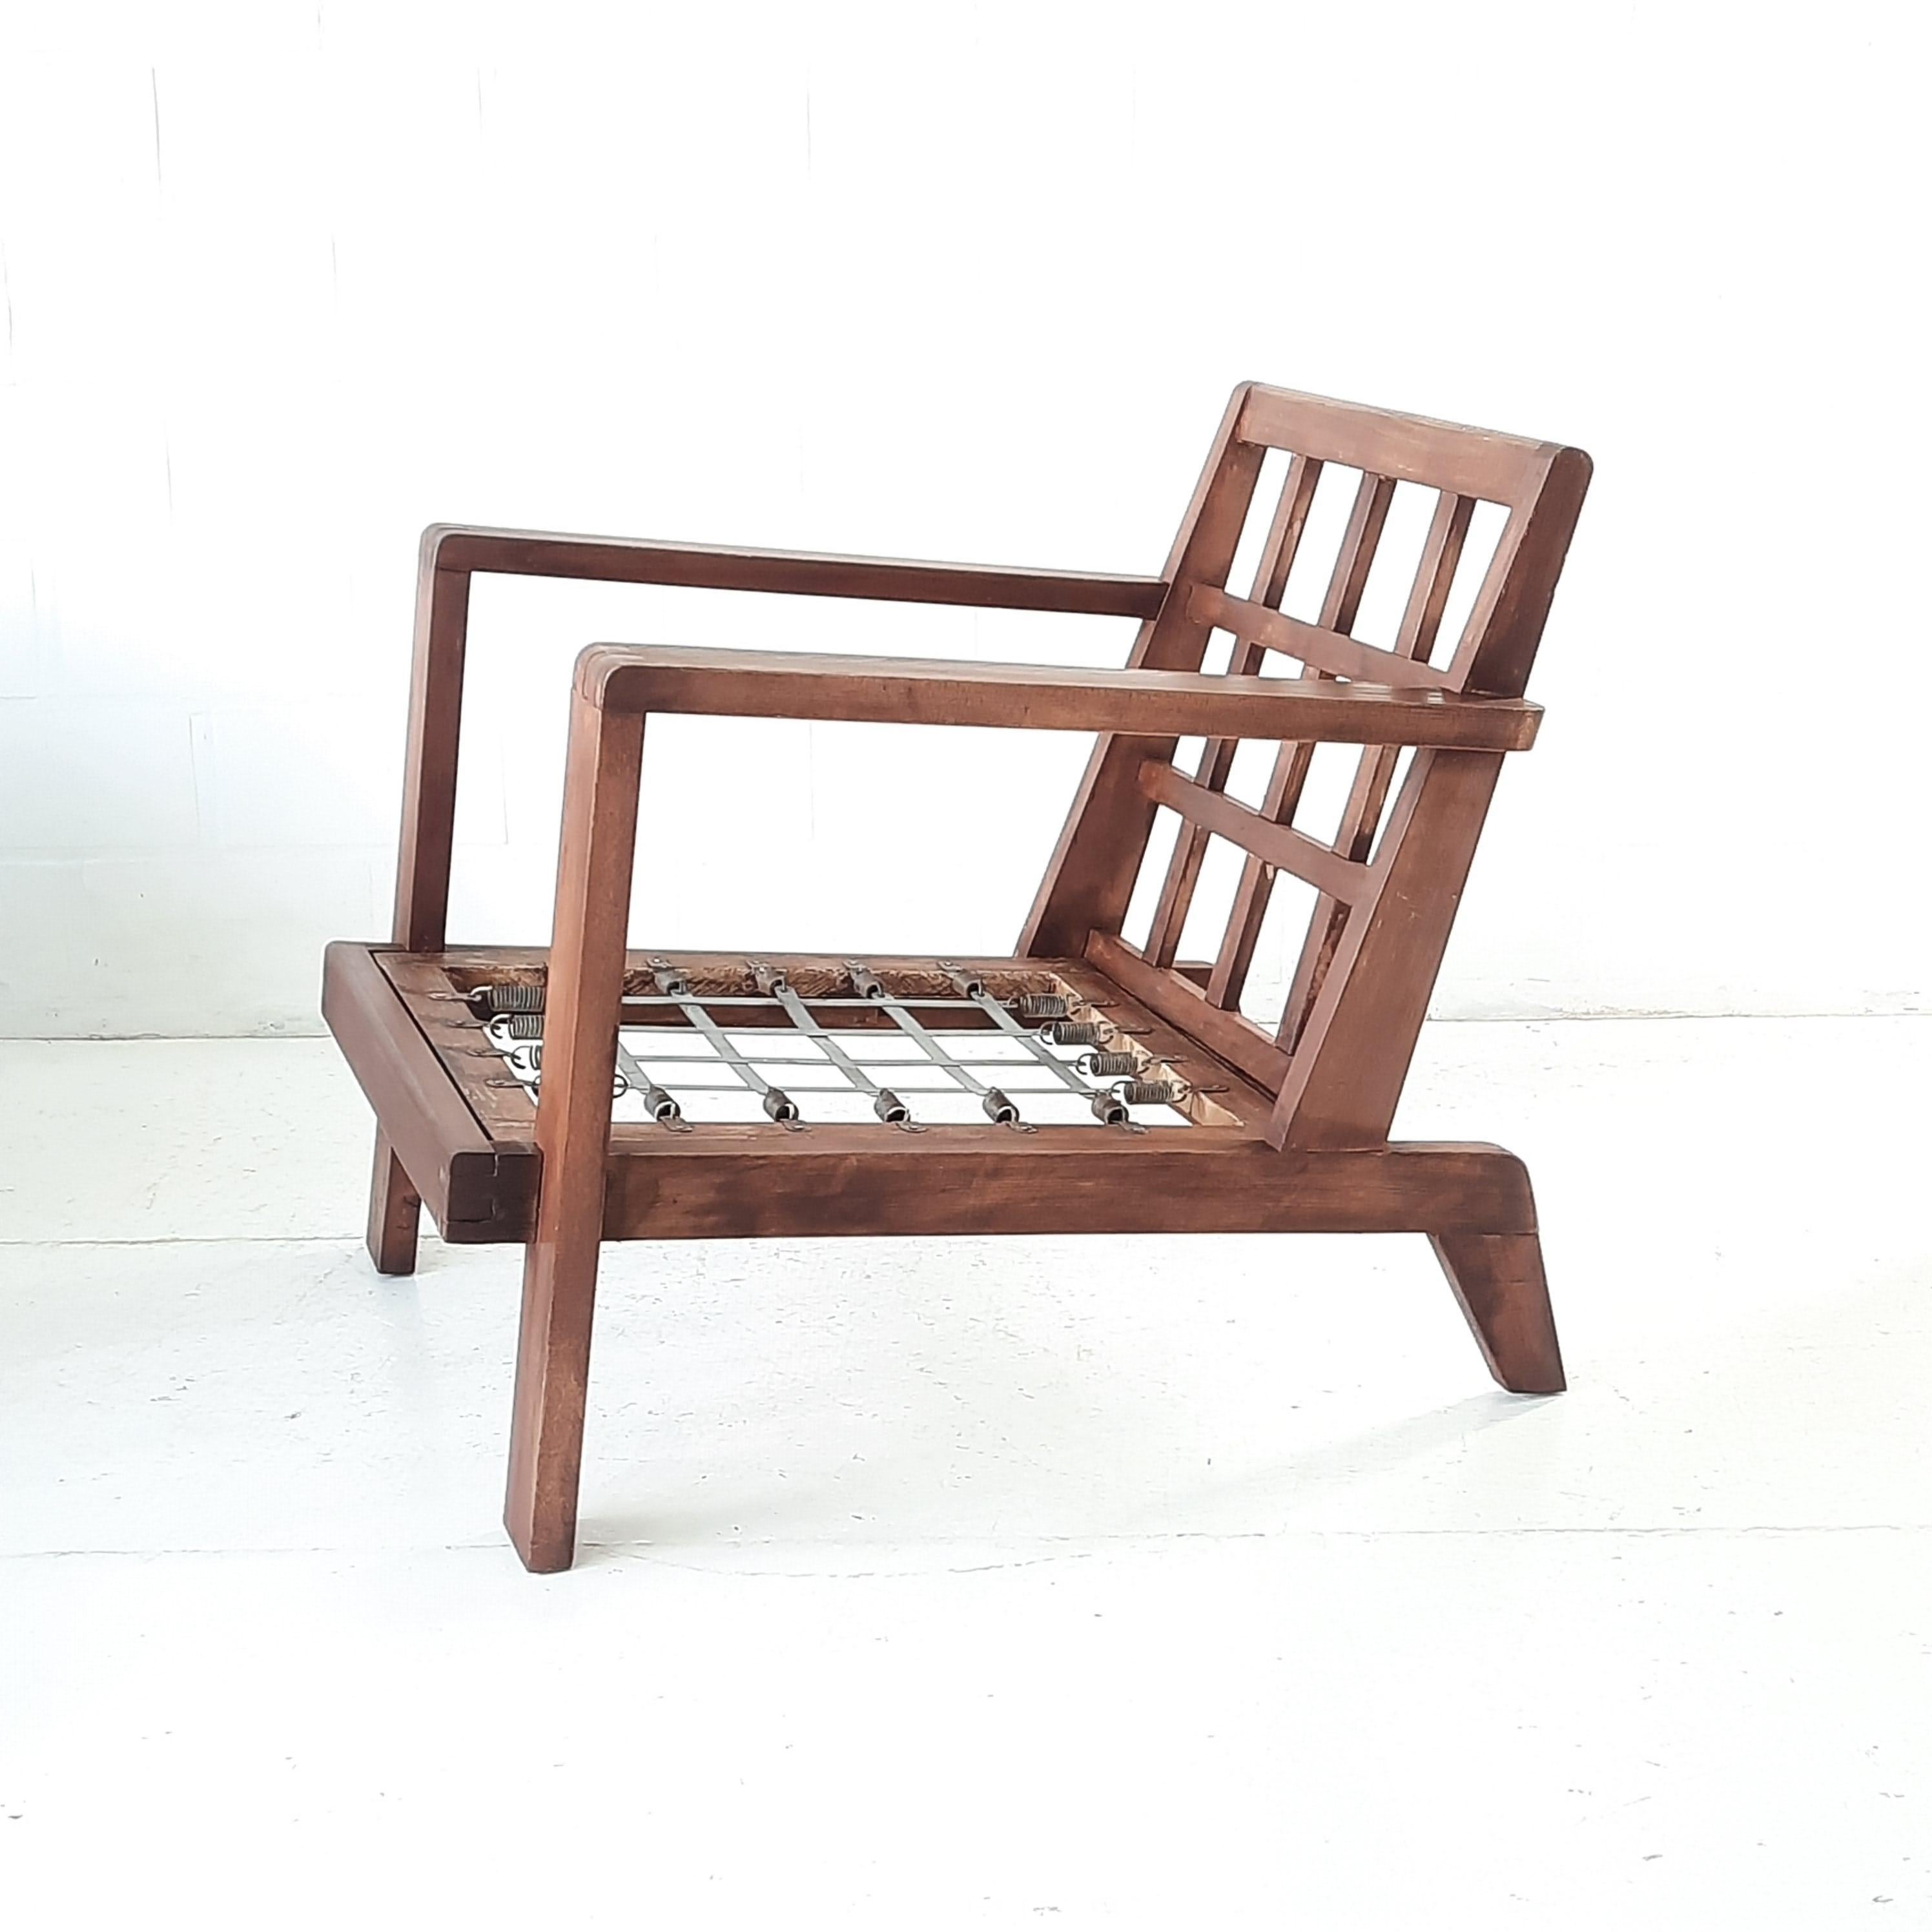 Fantastic early Rene Gabriel lounge chair in a dark stained massive wood.
Comes with the original metal slats and springs bottomplate.
Chair has been restorated to its original condition as it has been painted overtime by a previous owner over time